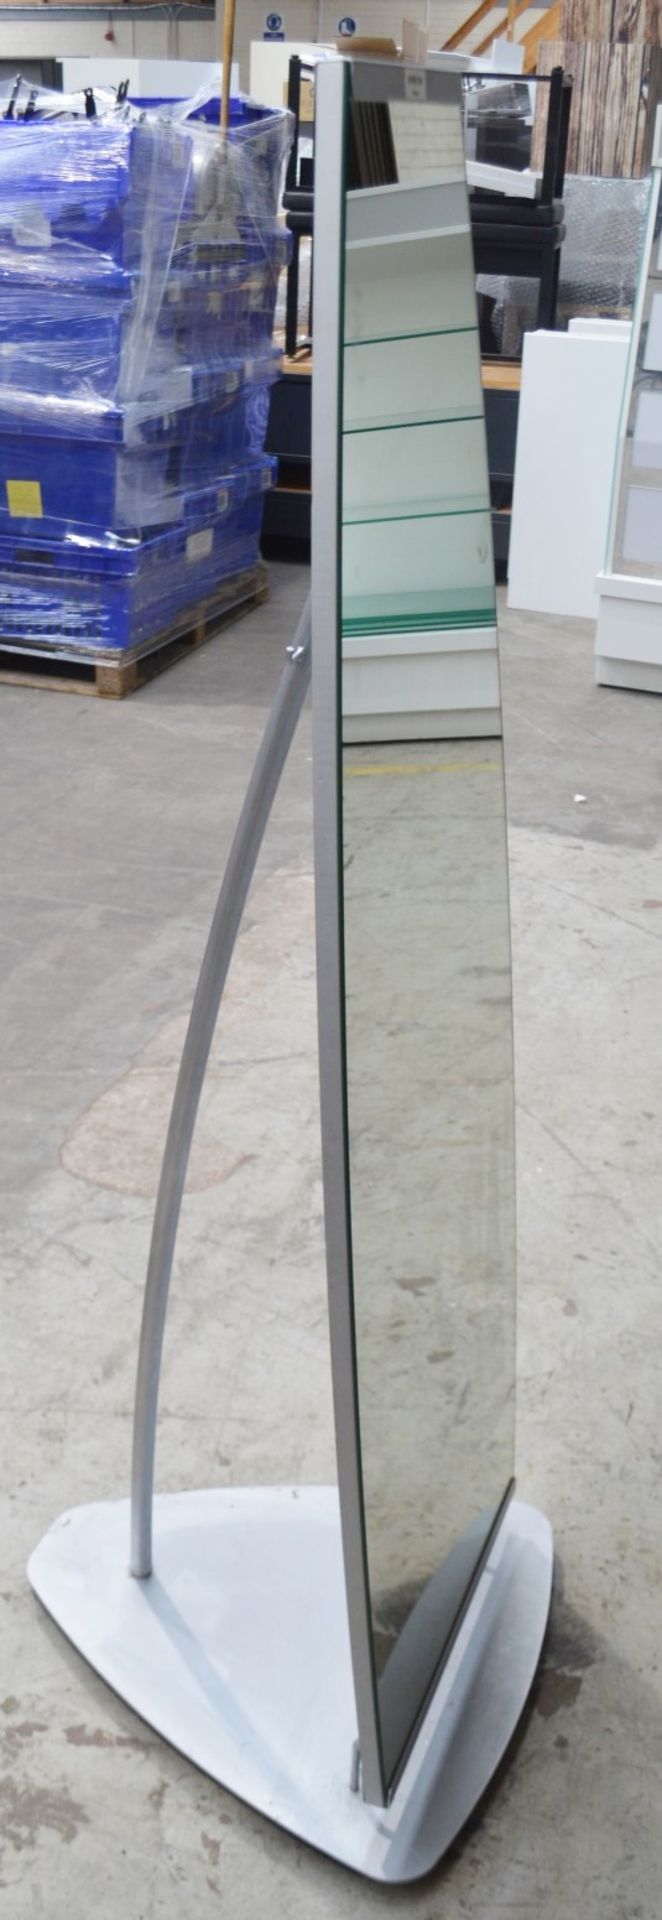 1 x Freestanding Department Store Mirror - 159cm Tall - Ref: MHB160 - CL011 - Location: Altrincham - Image 3 of 4